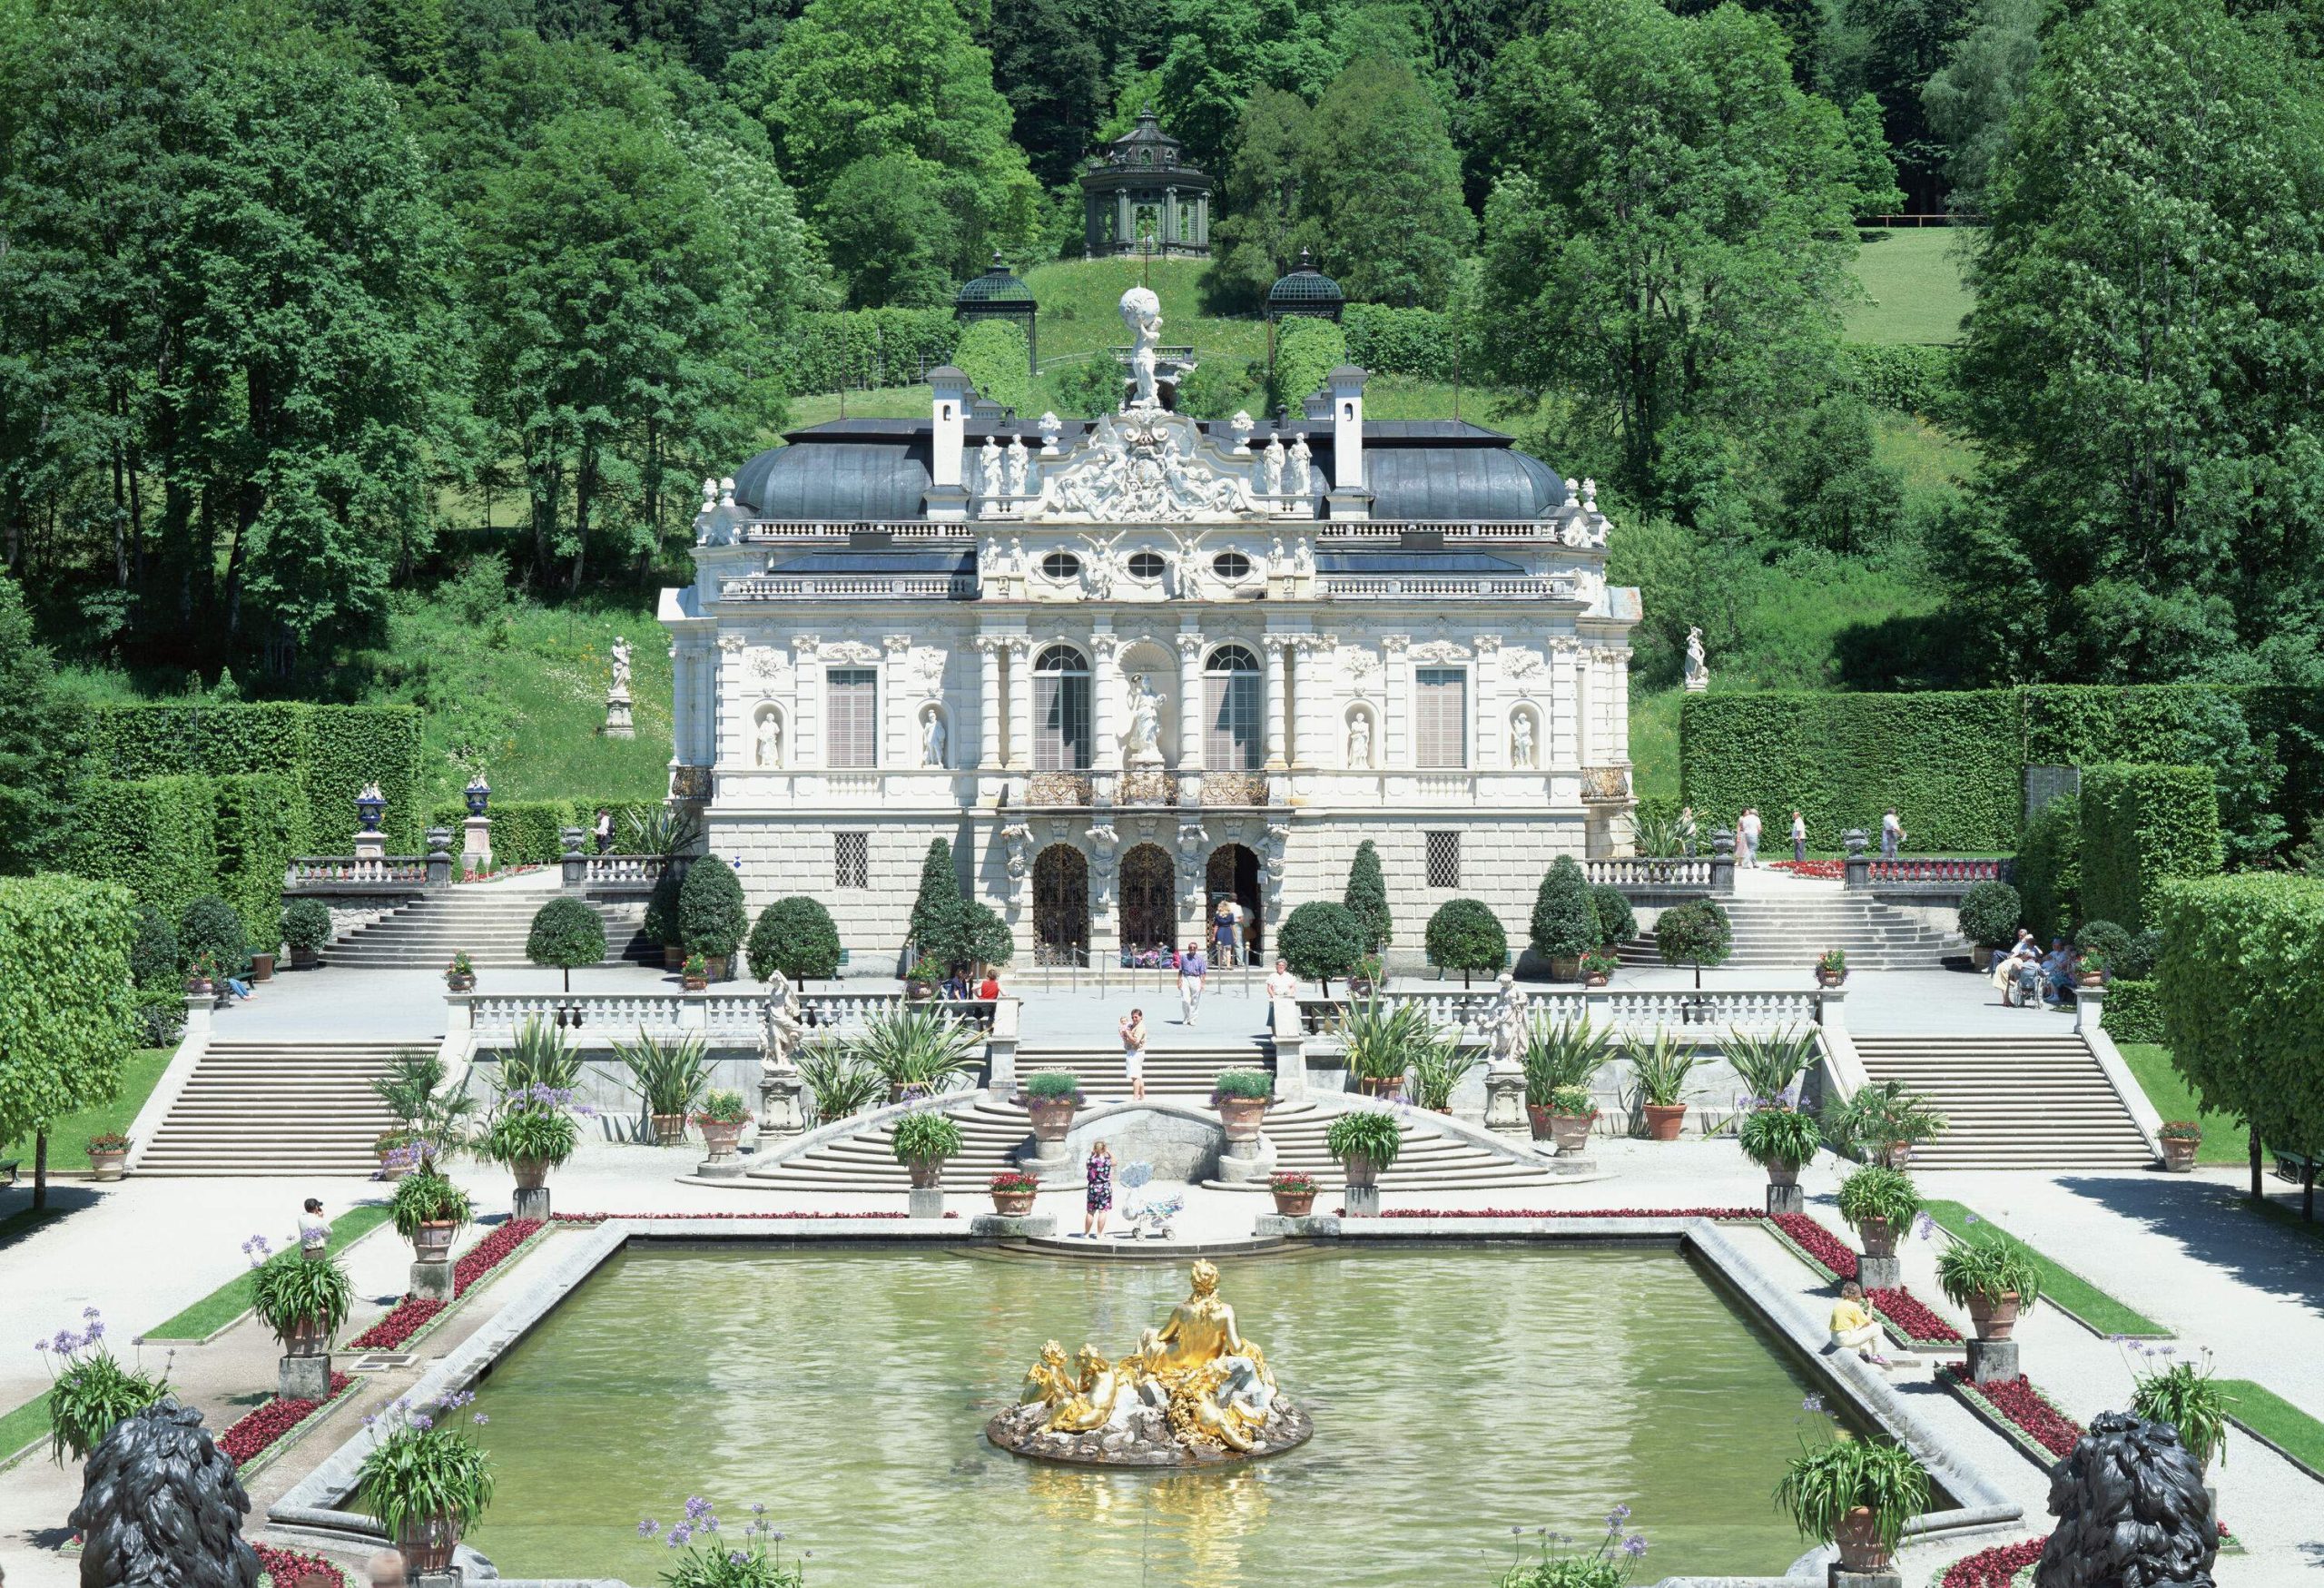 Linderhof Palace is a white palace with intricate stone façade and a grand front staircase in front of a pond with gold-plated statue in the centre.